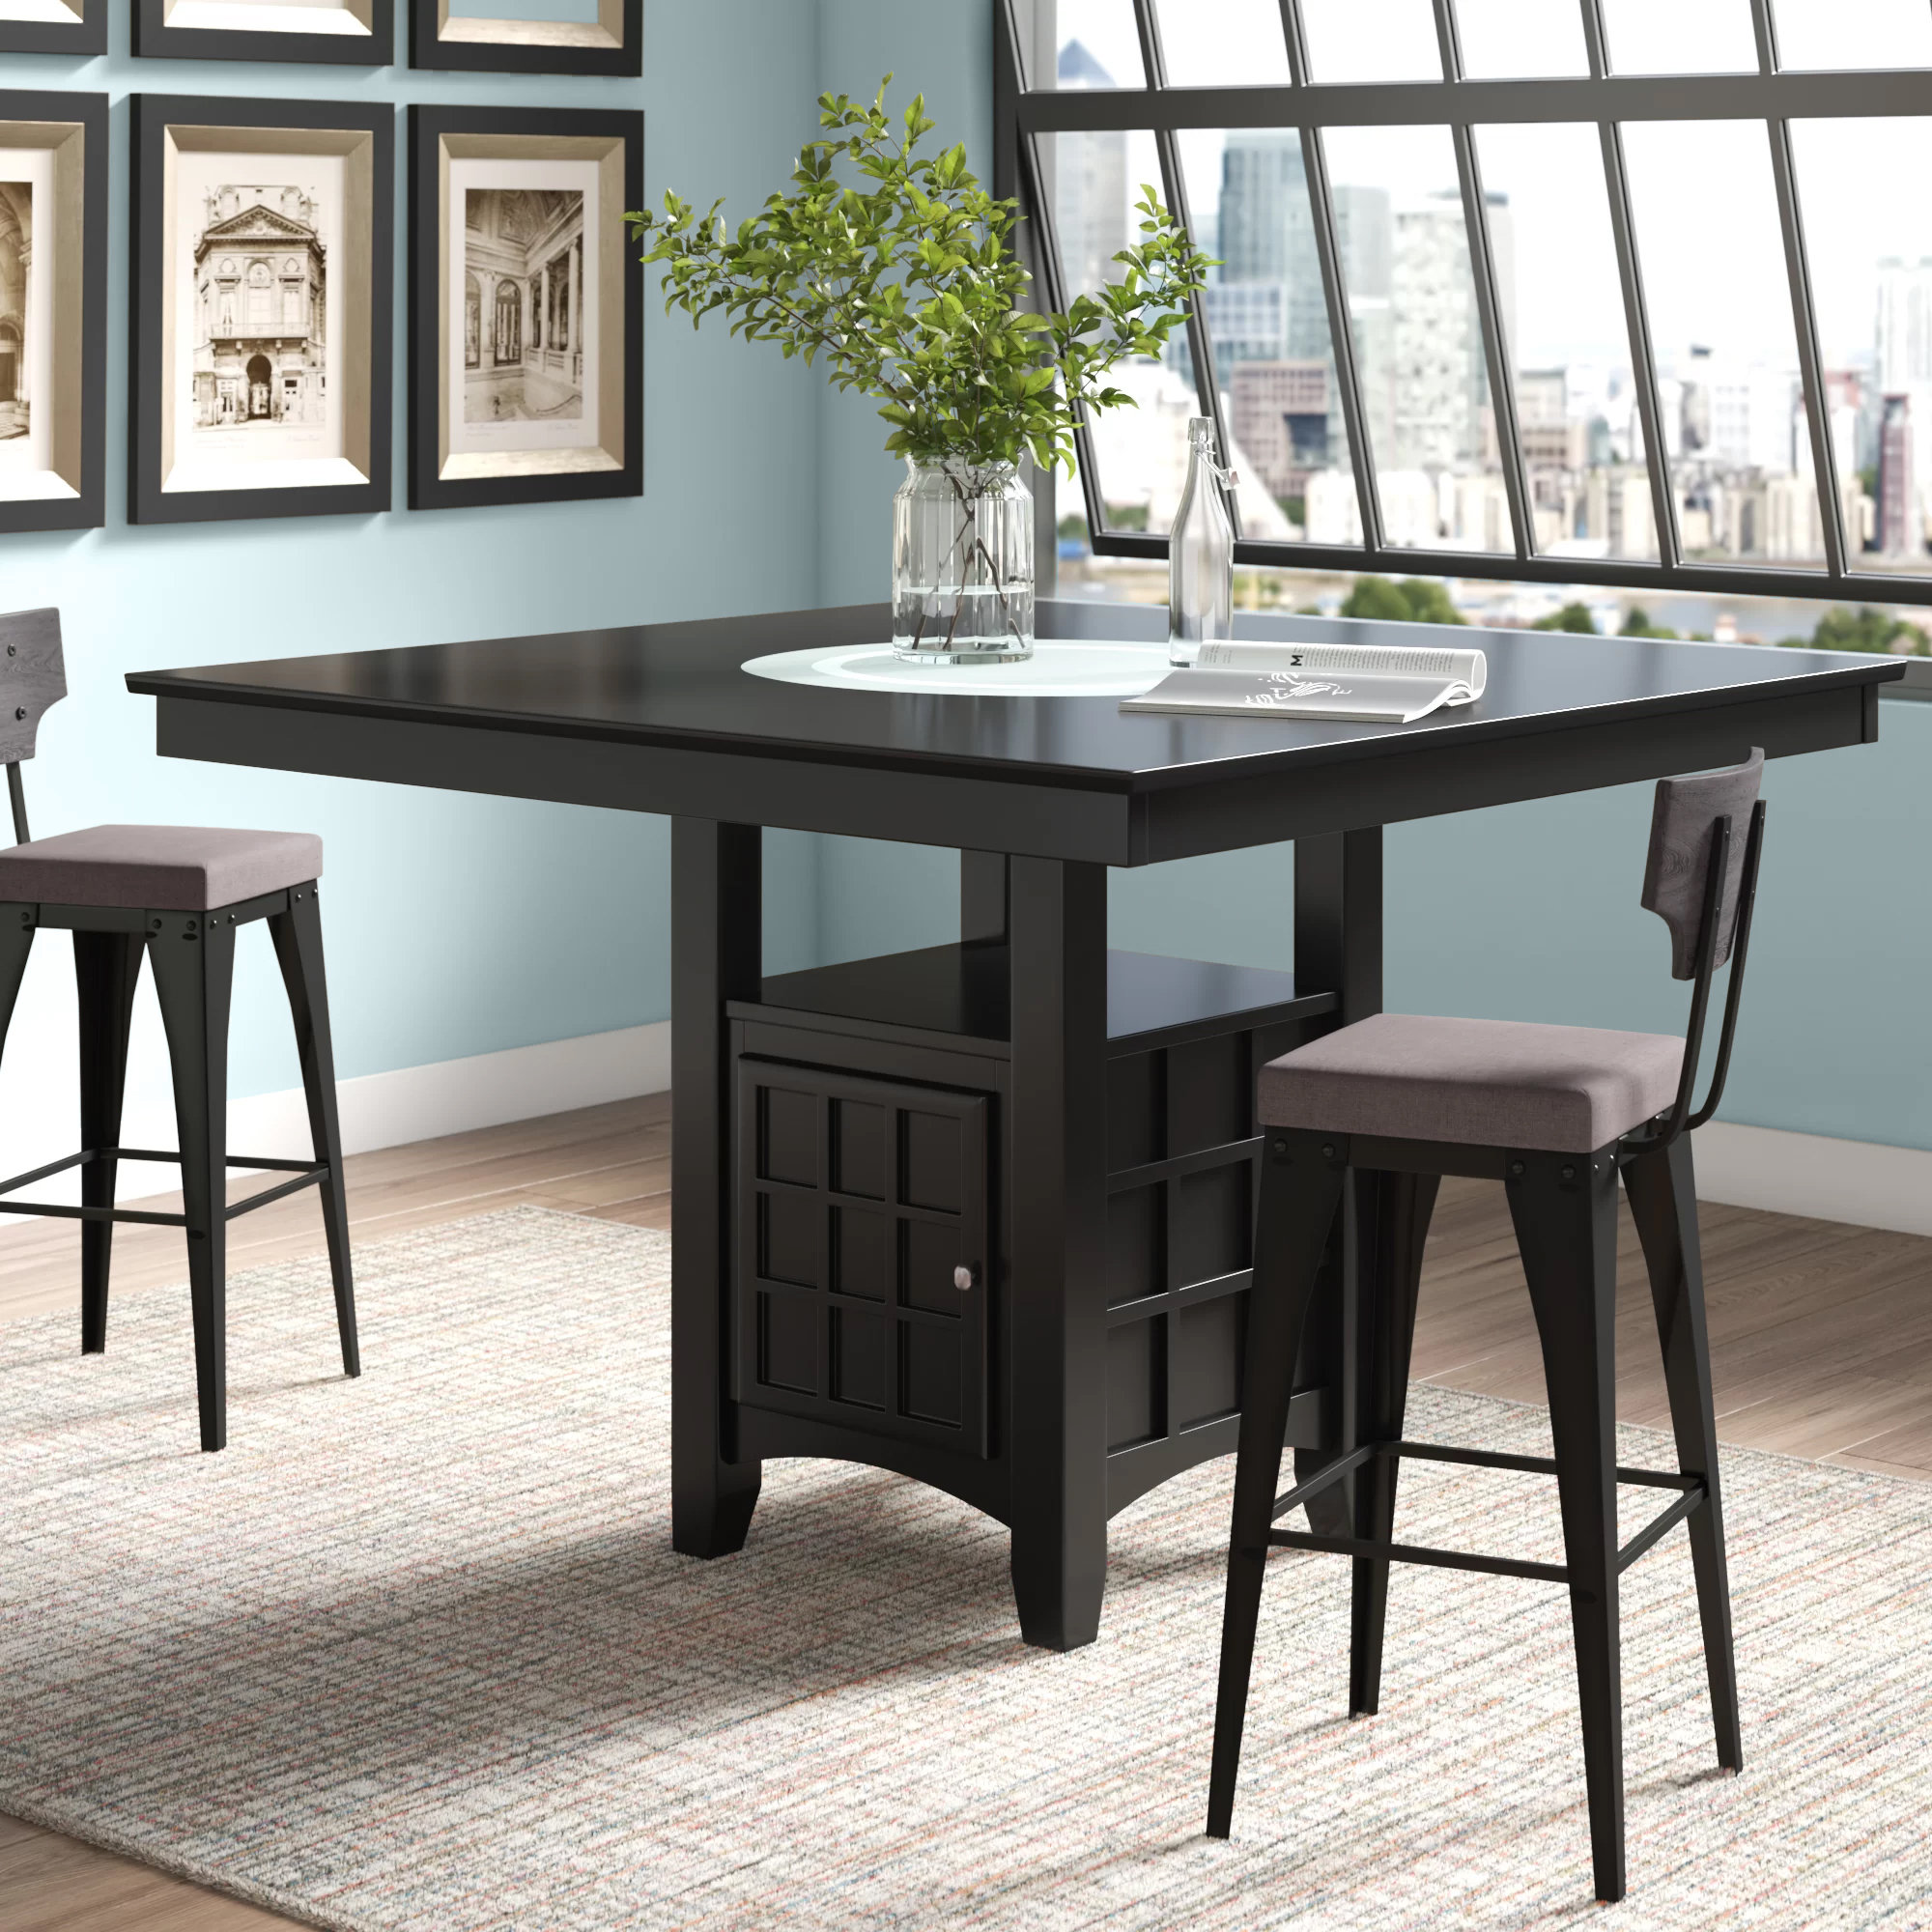 Wayfair 8 Seat Tall Kitchen Dining Tables You Ll Love In 2021